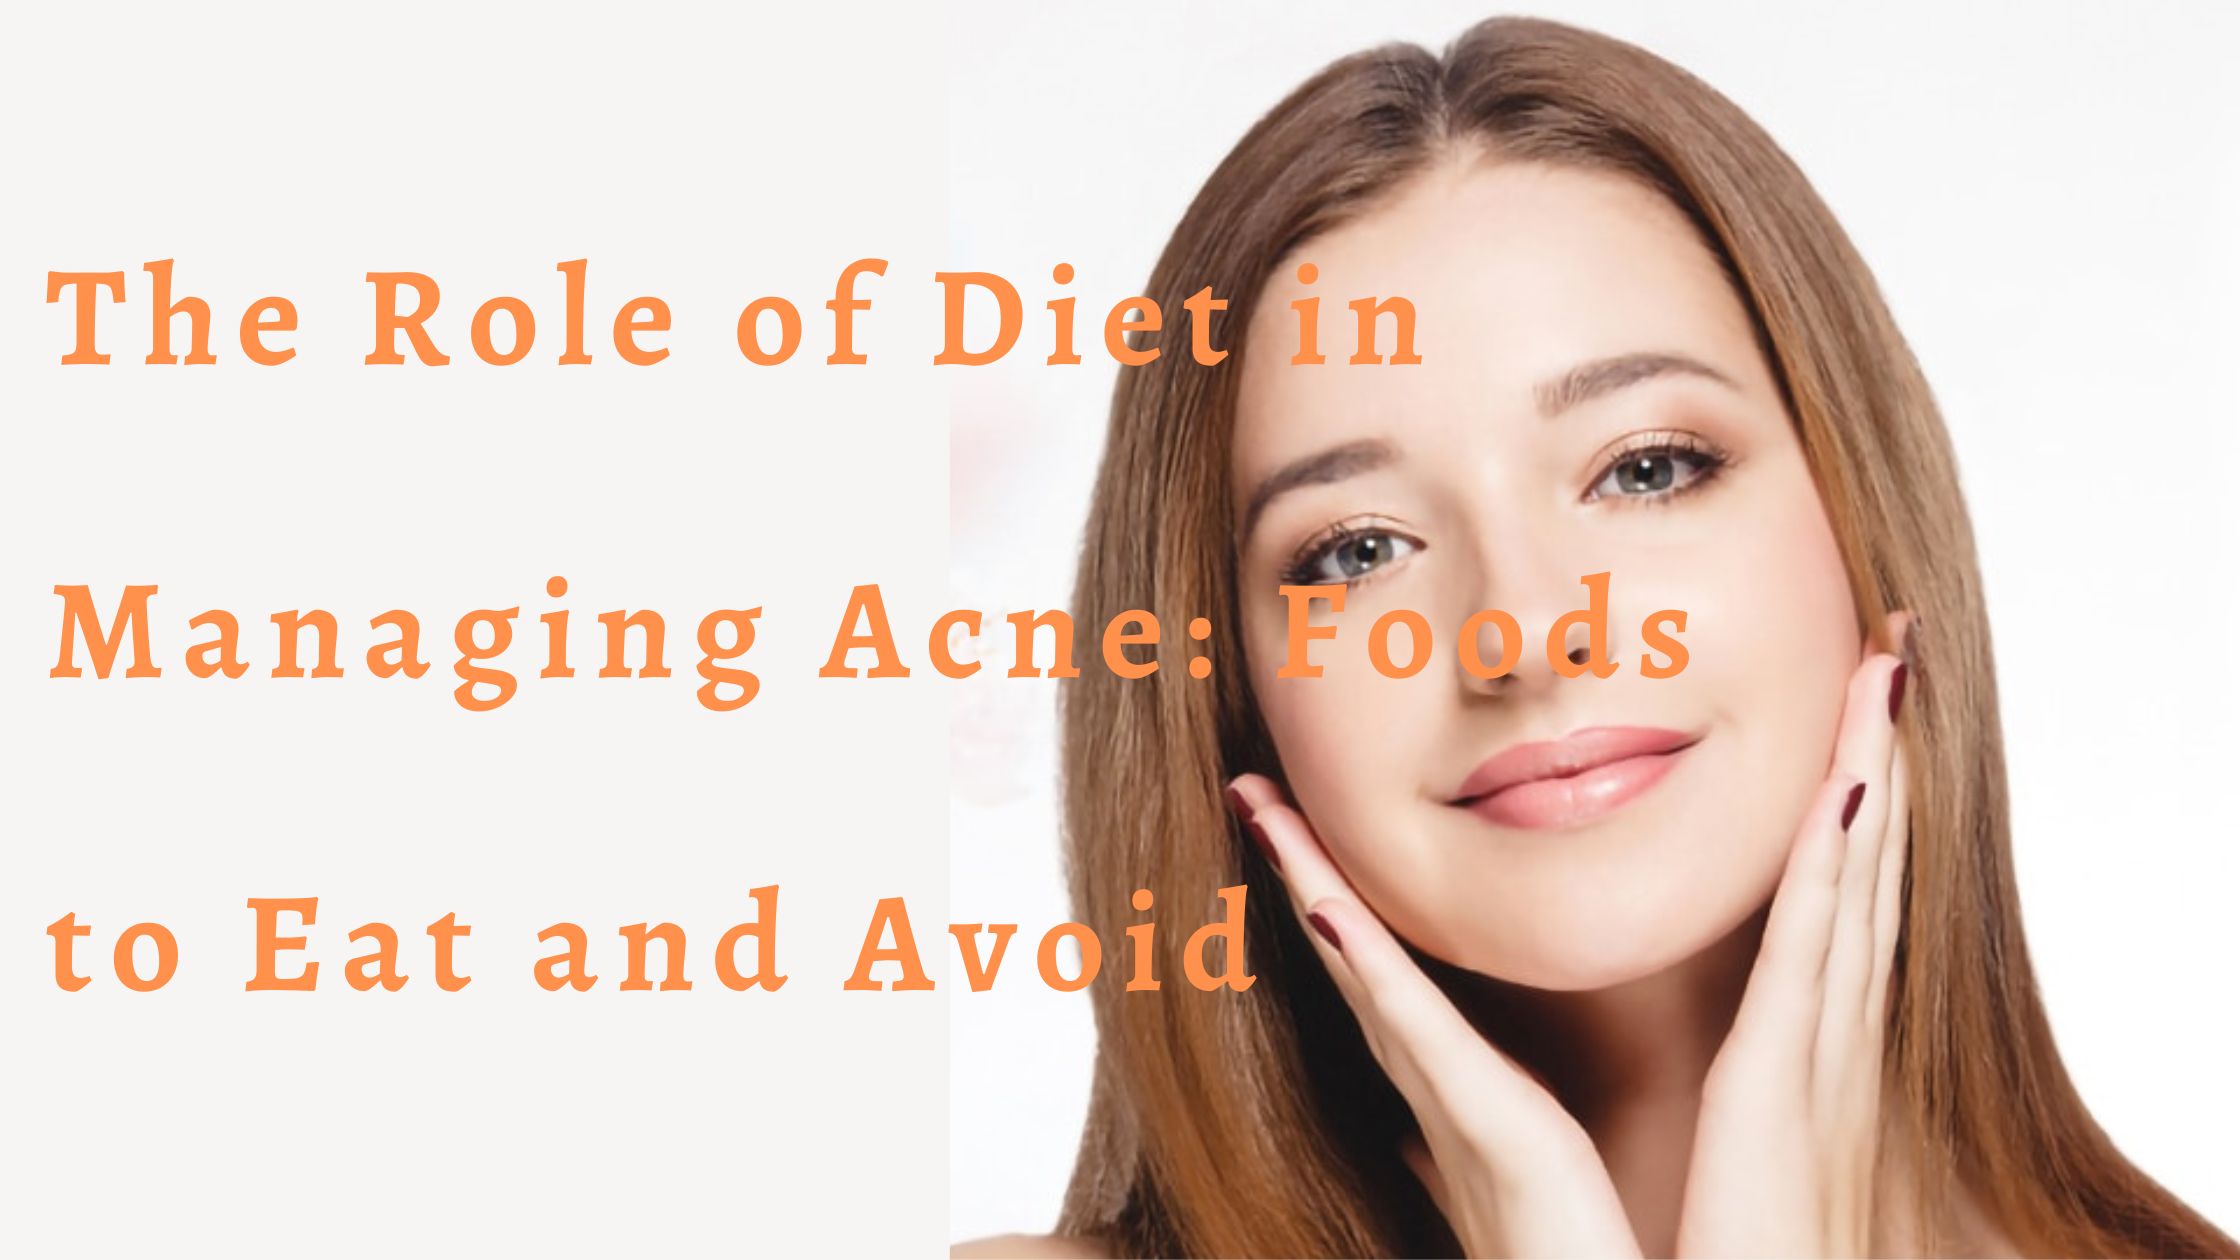 You are currently viewing The Role of Diet in Managing Acne: Foods to Eat and Avoid